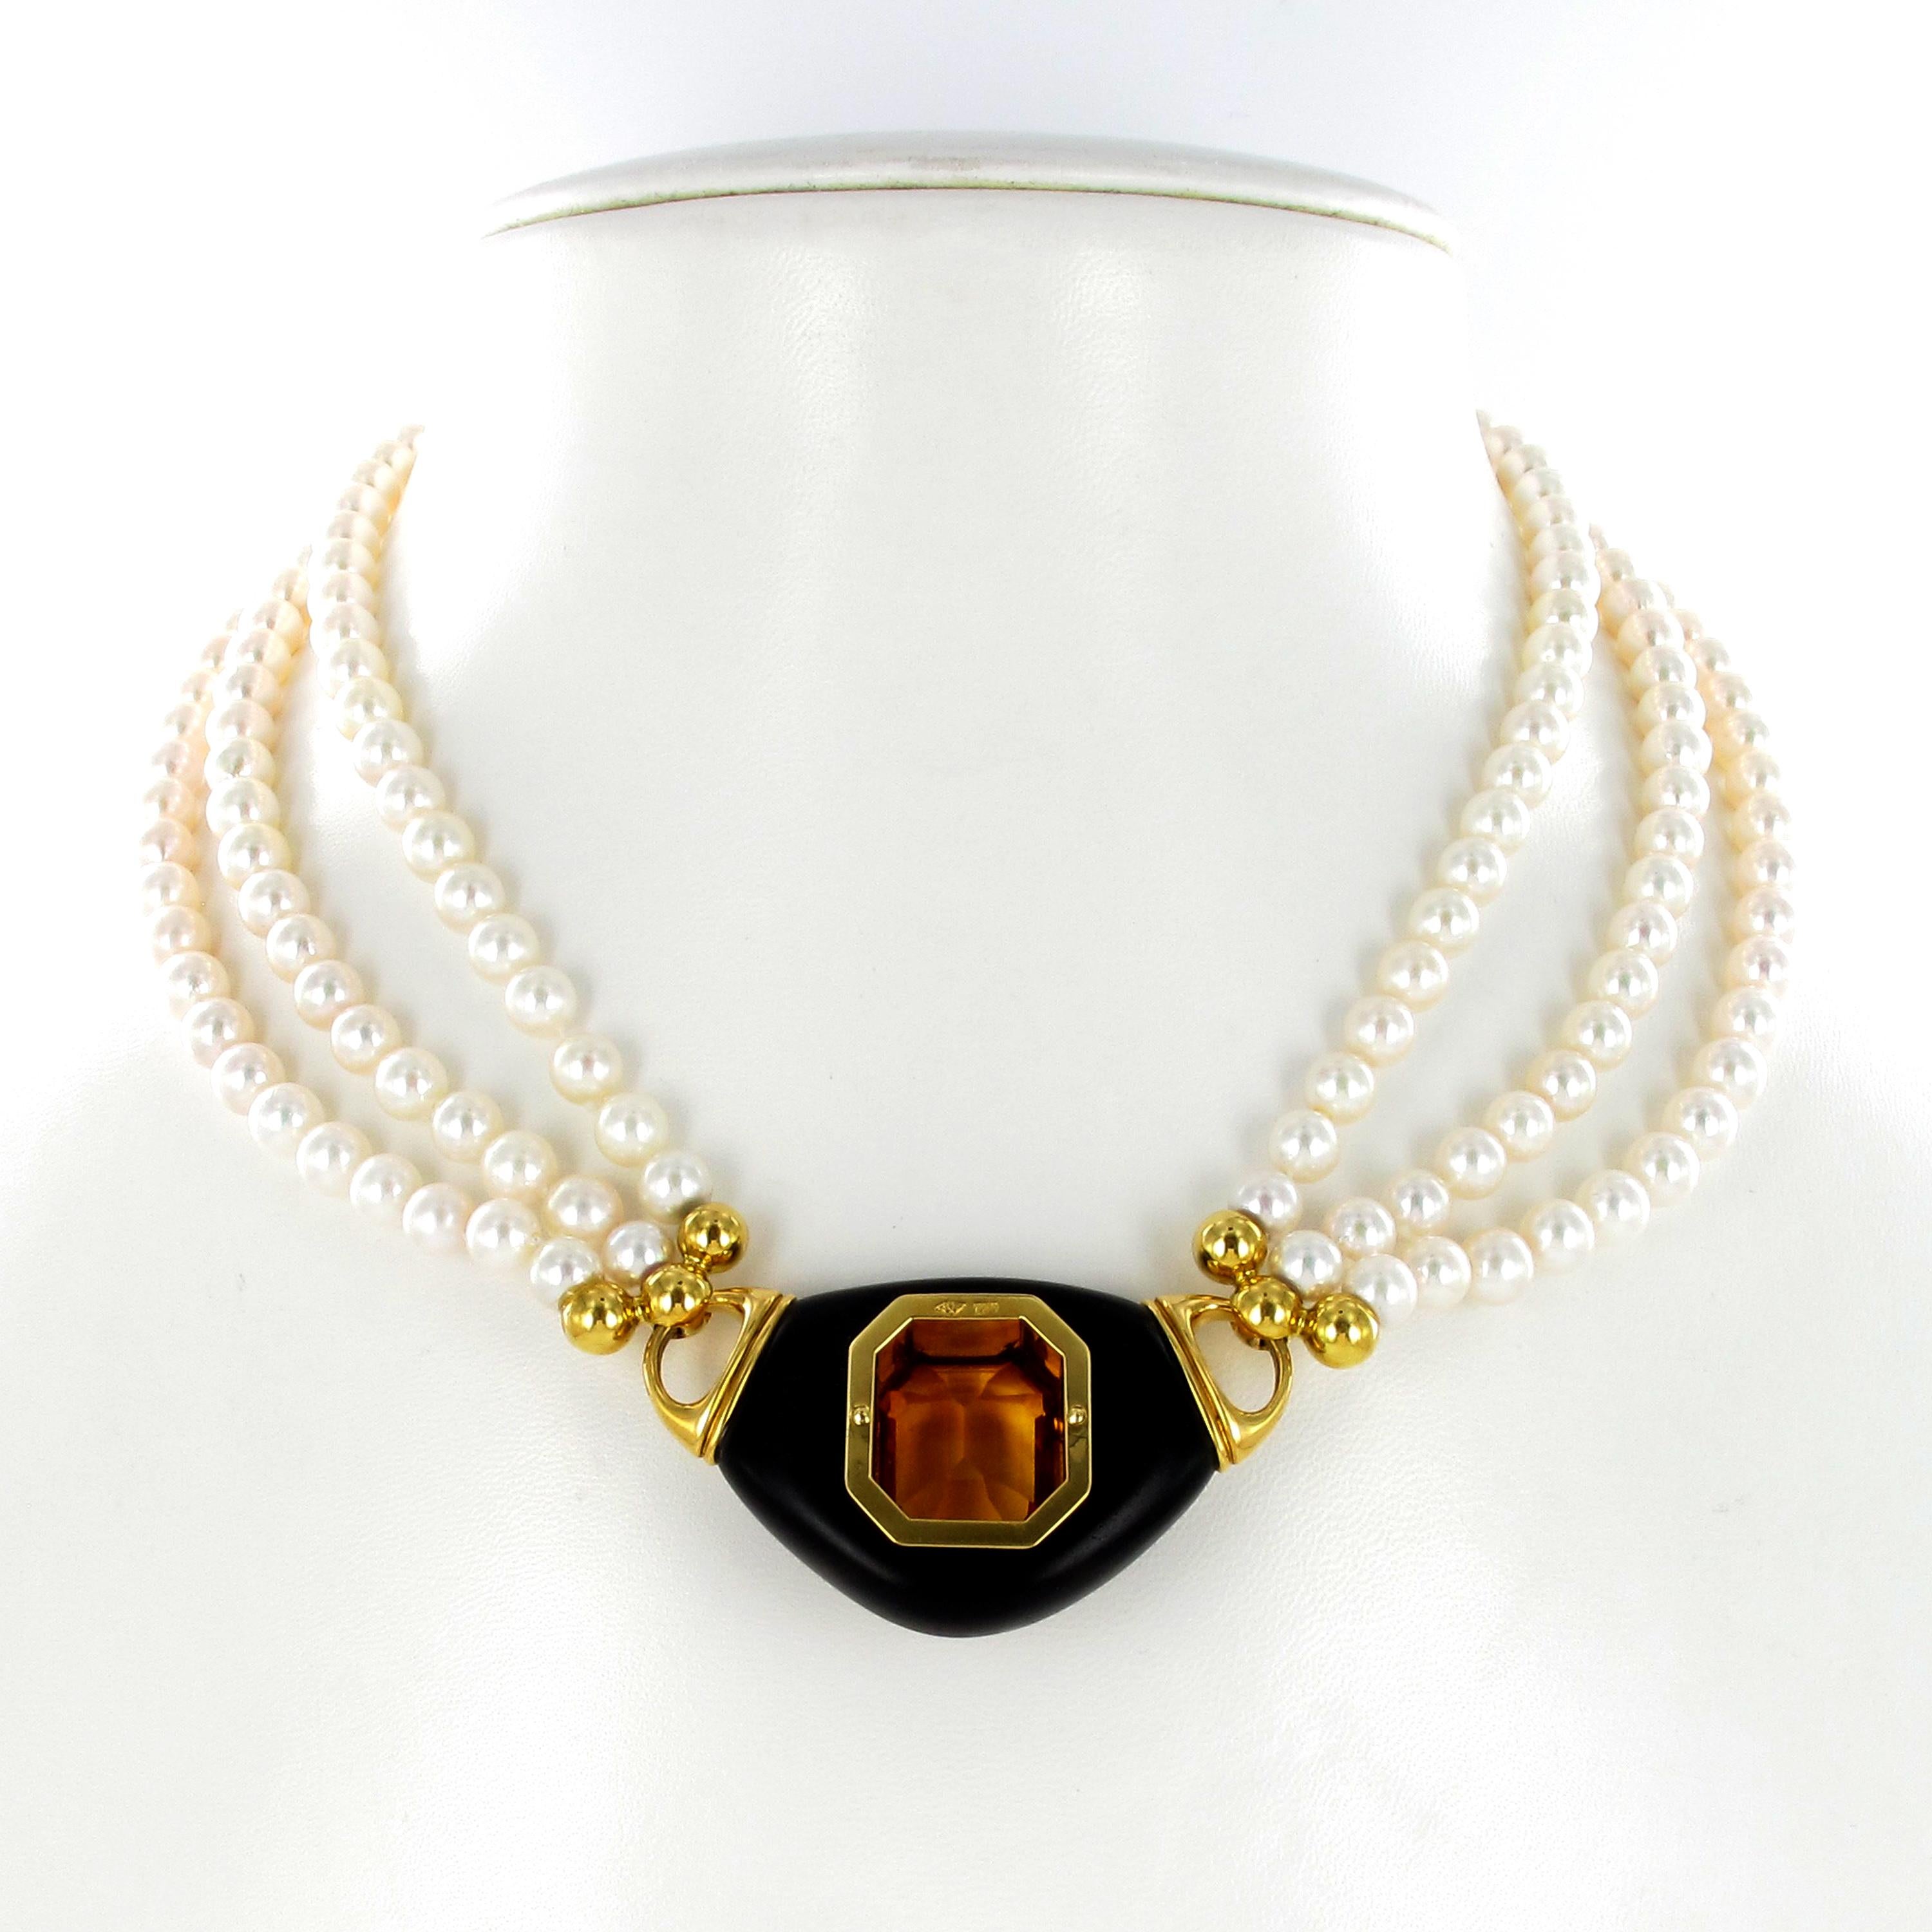 Exquisite Citrine, Ebony and Akoya Cultured Pearl Necklace For Sale 1